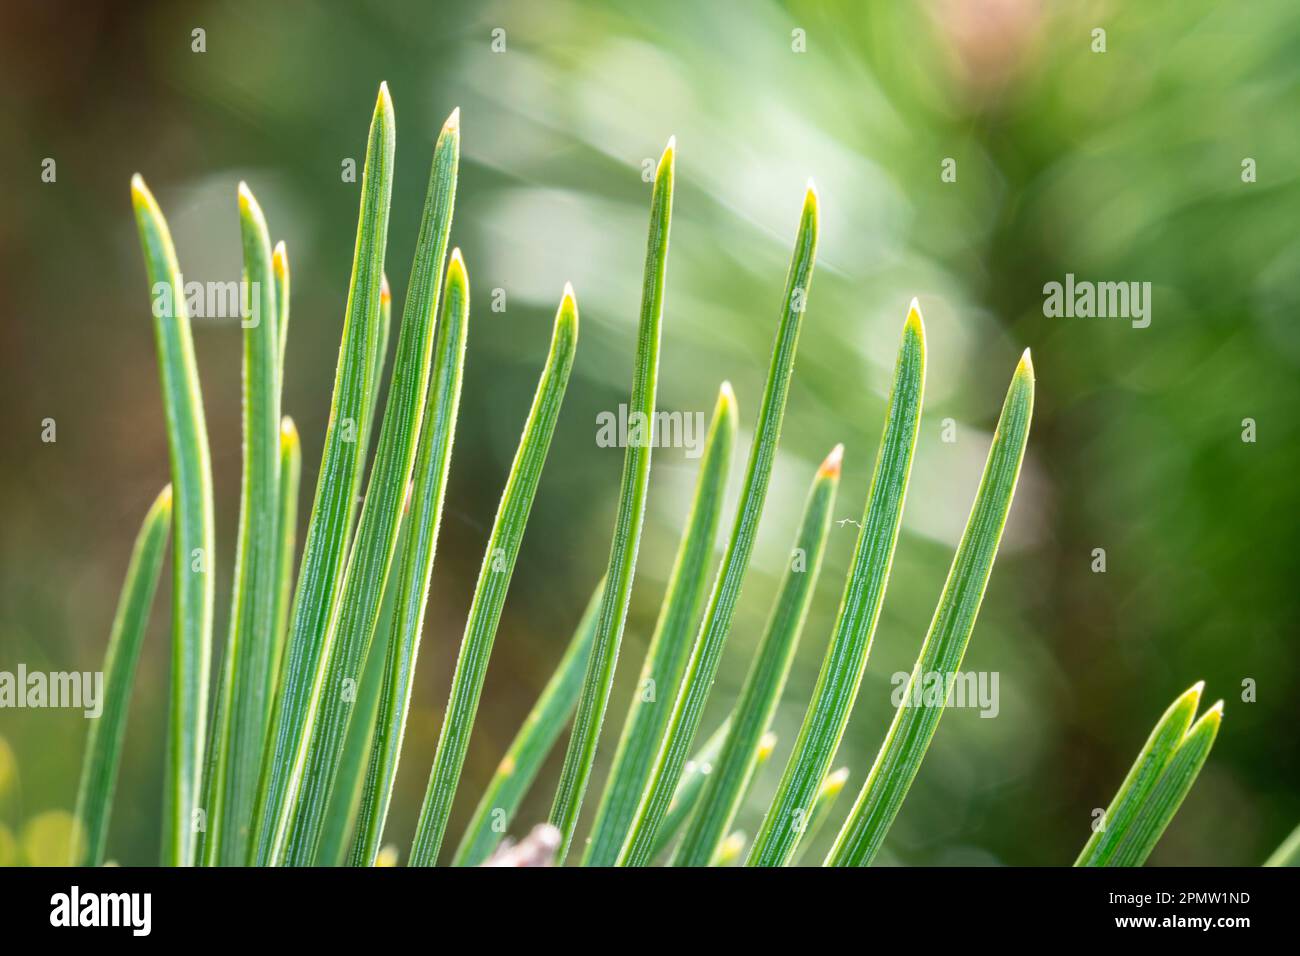 Detailed image of the green needles of a mugo pine tree Stock Photo